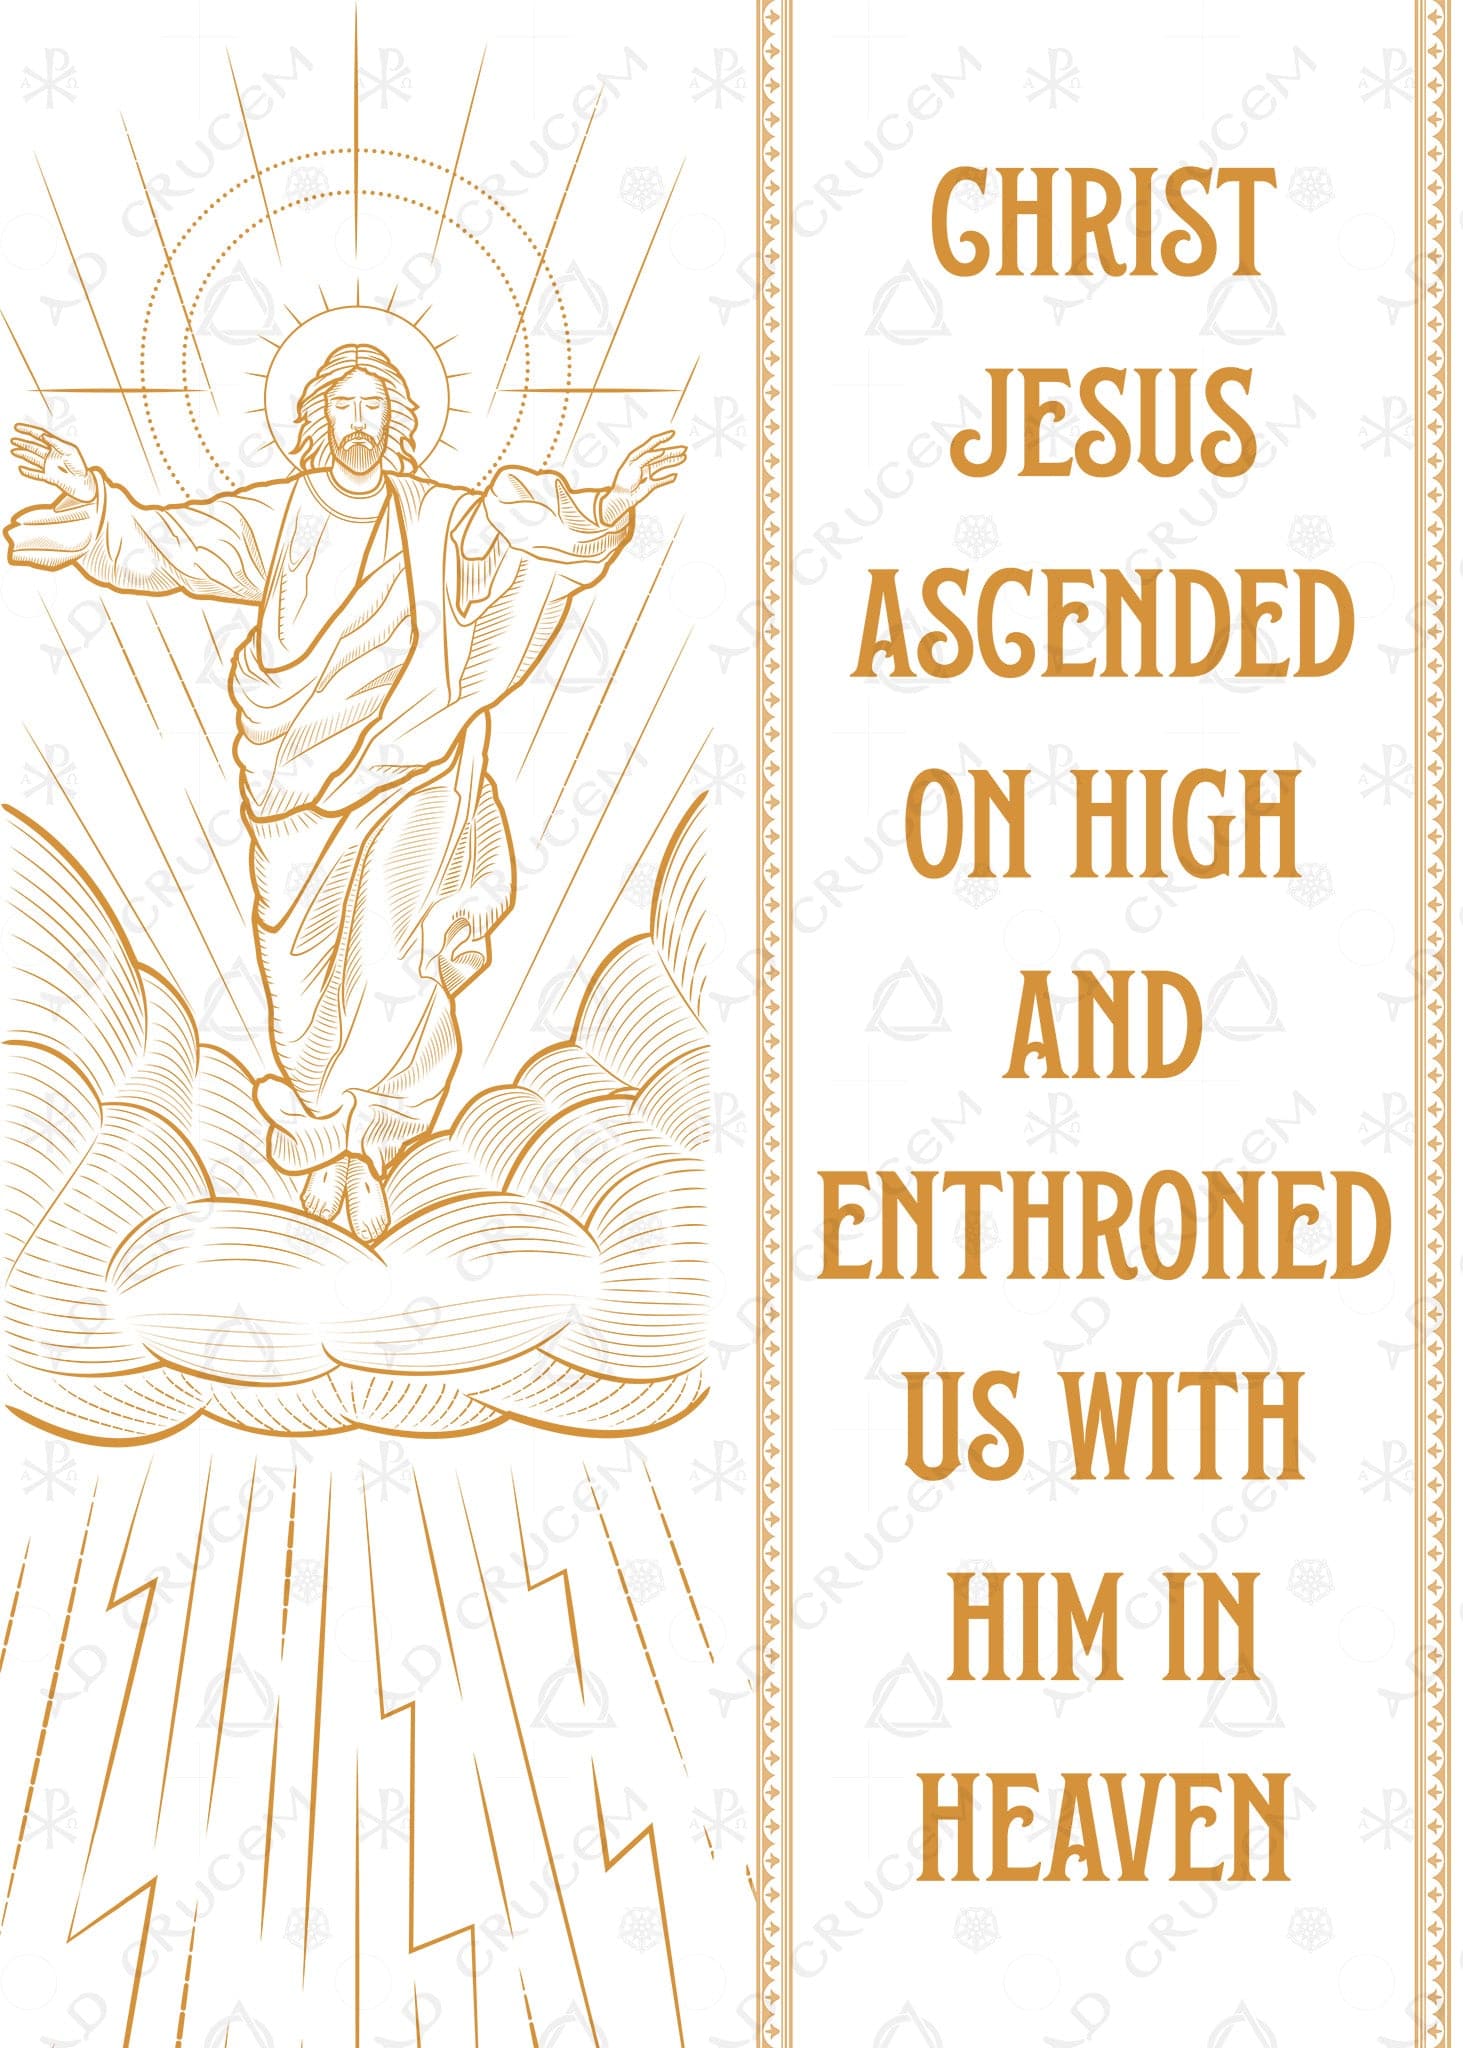 Ad Crucem Easter or Ascension Banners Set of Two